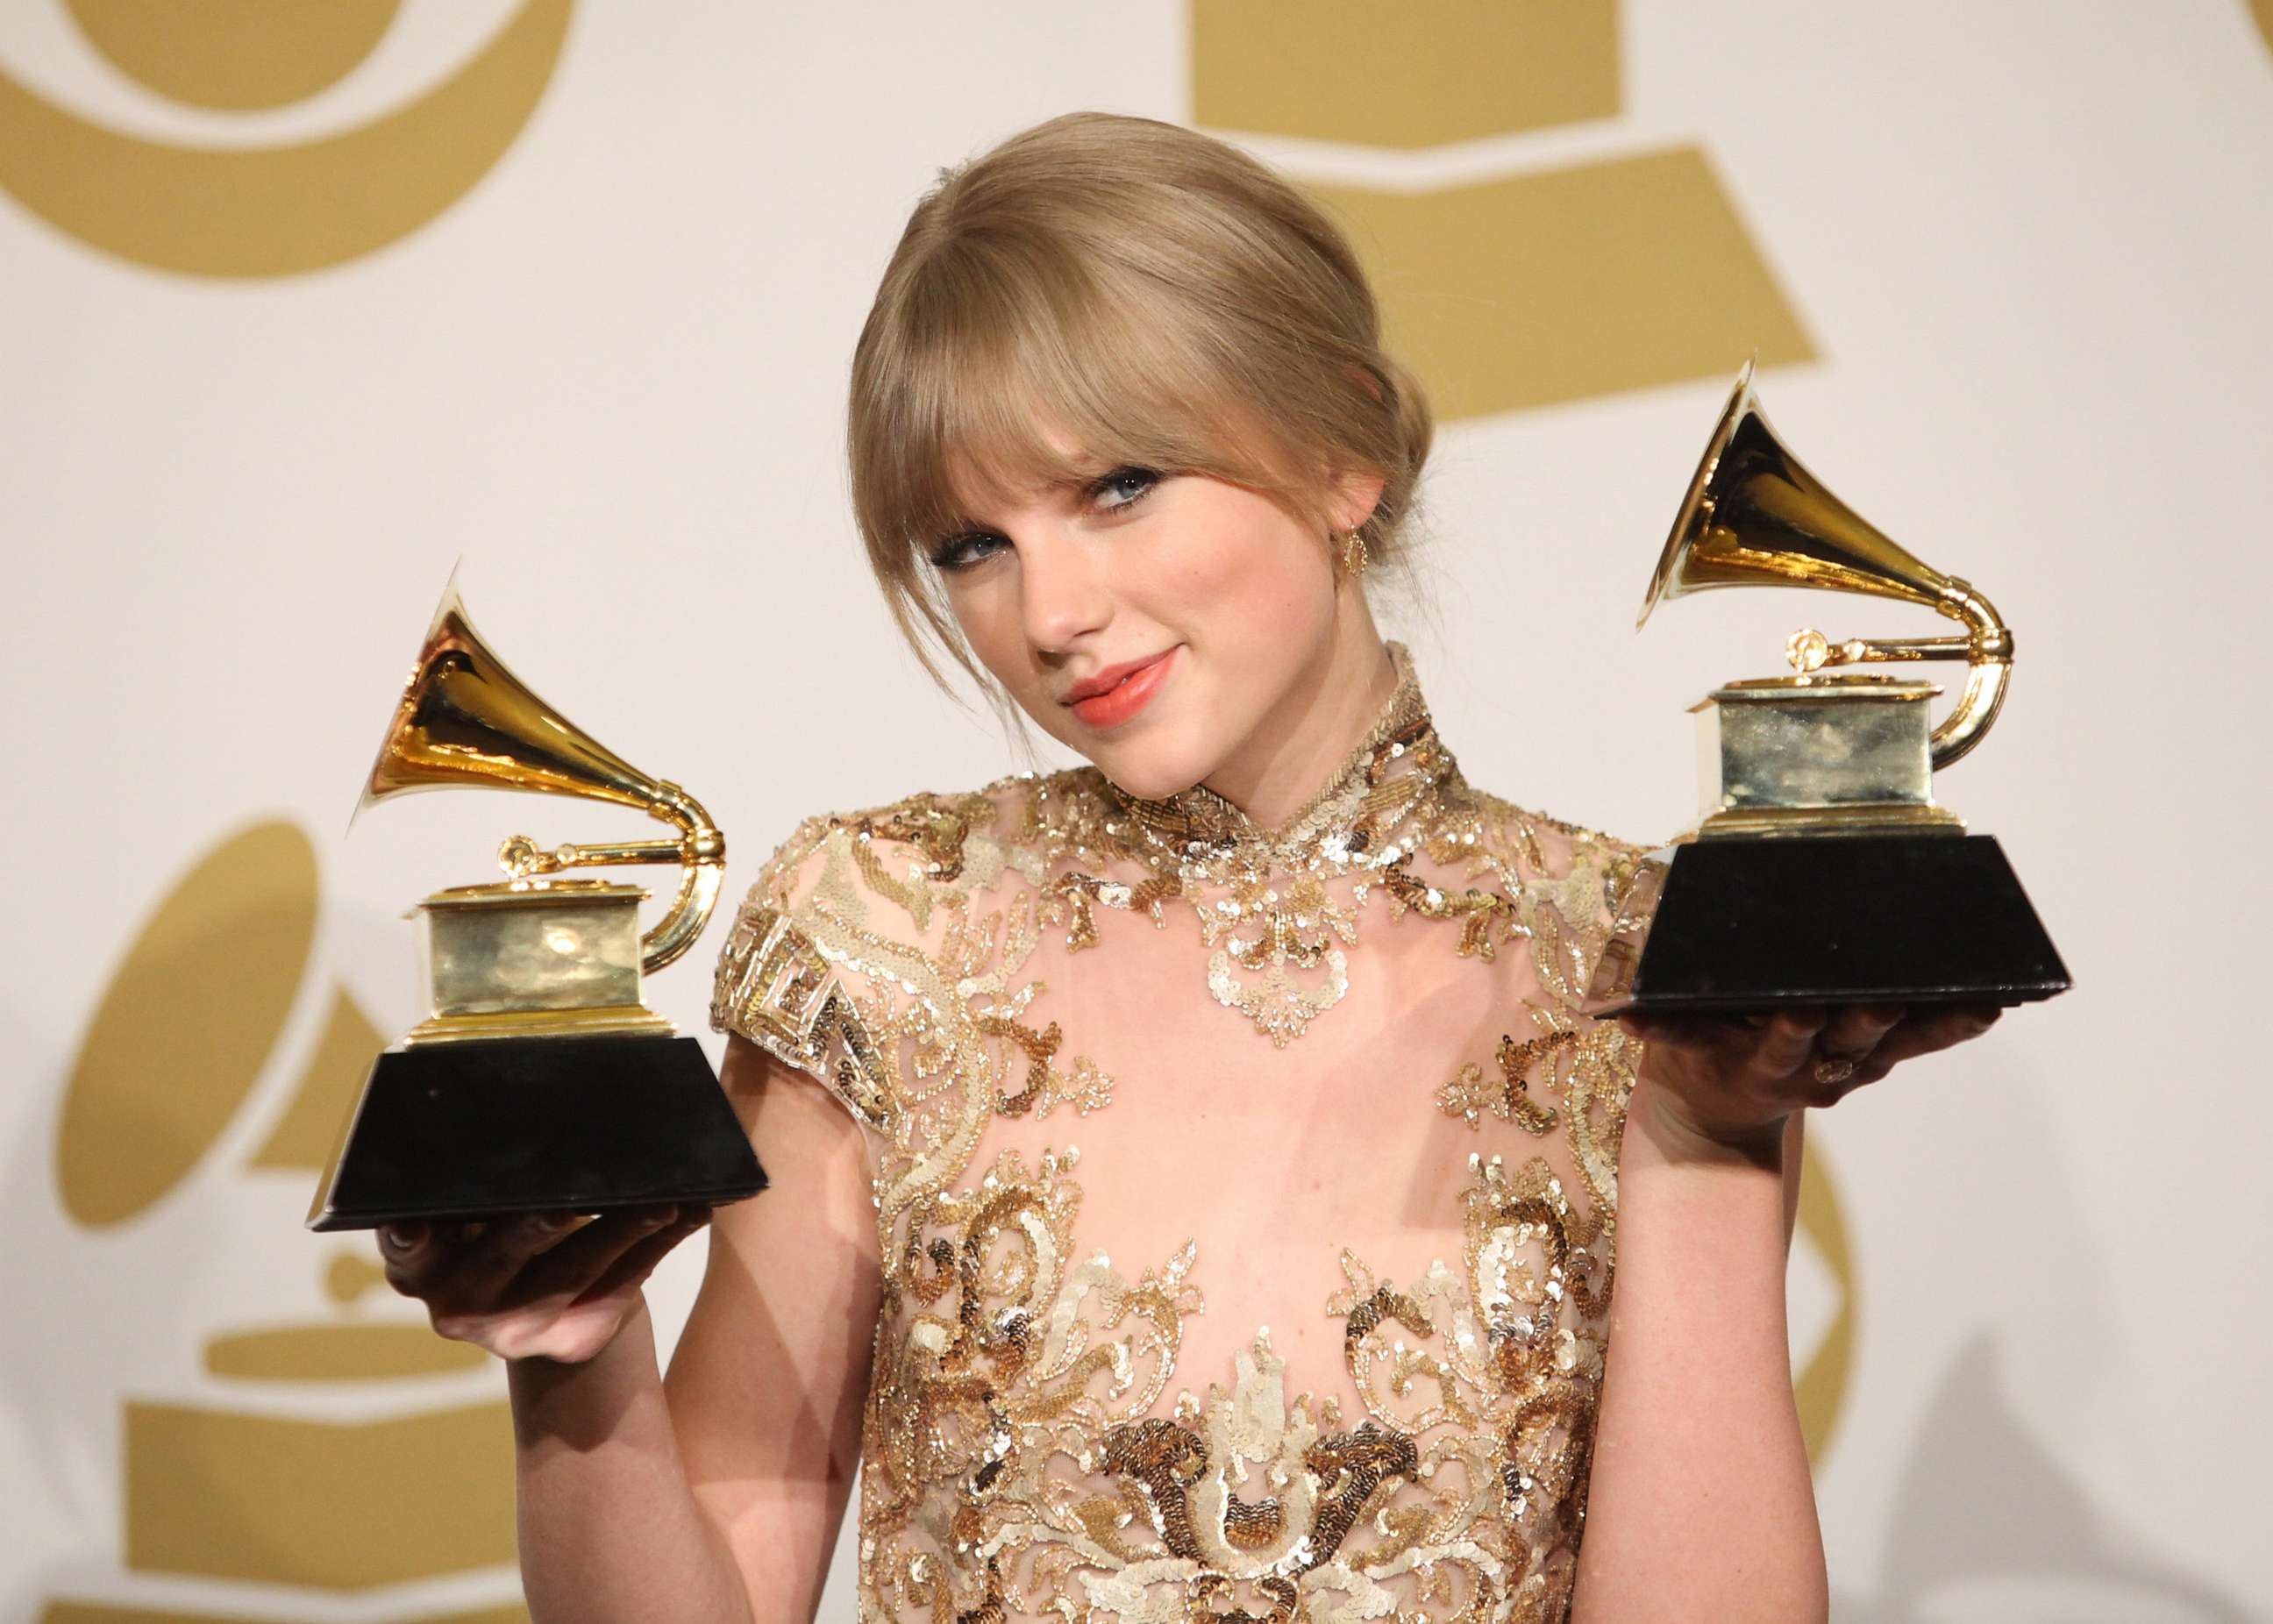 PHOTO: Taylor Swift attends the 54th Annual GRAMMY Awards - press room held at Staples Center on Feb. 12, 2012 in Los Angeles.